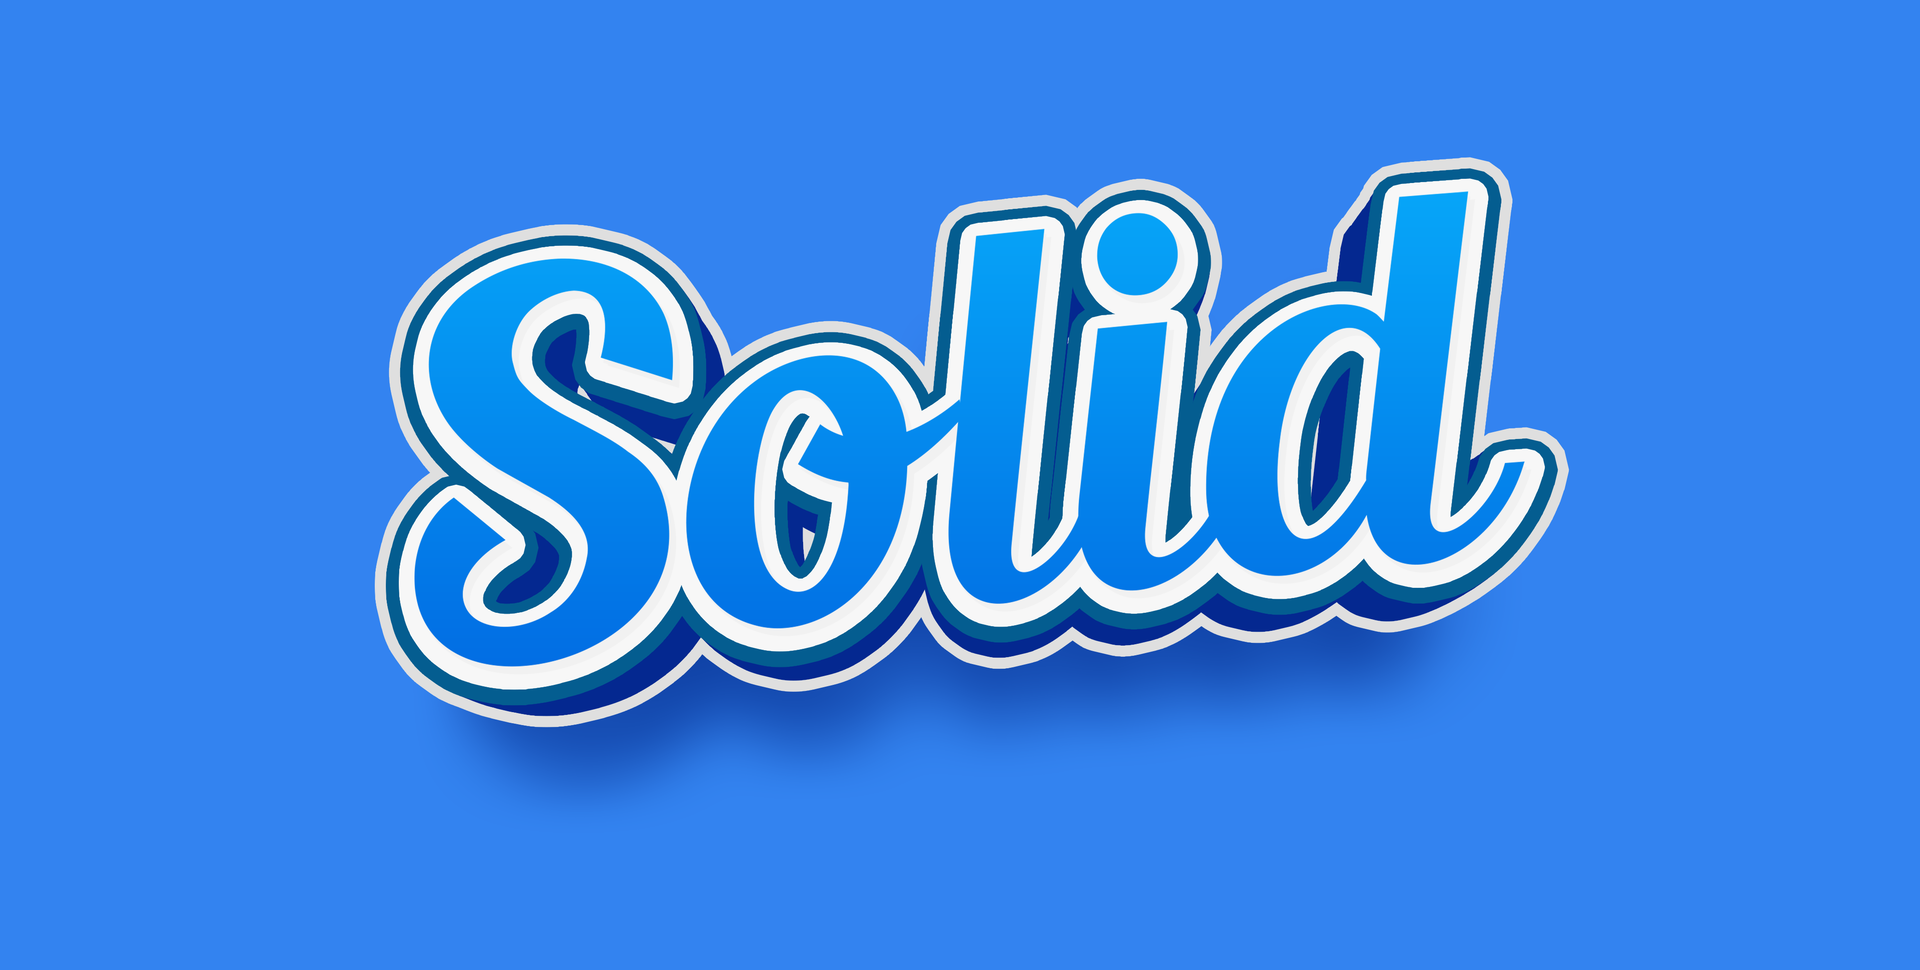 3d solid blue - editable text style effect psd